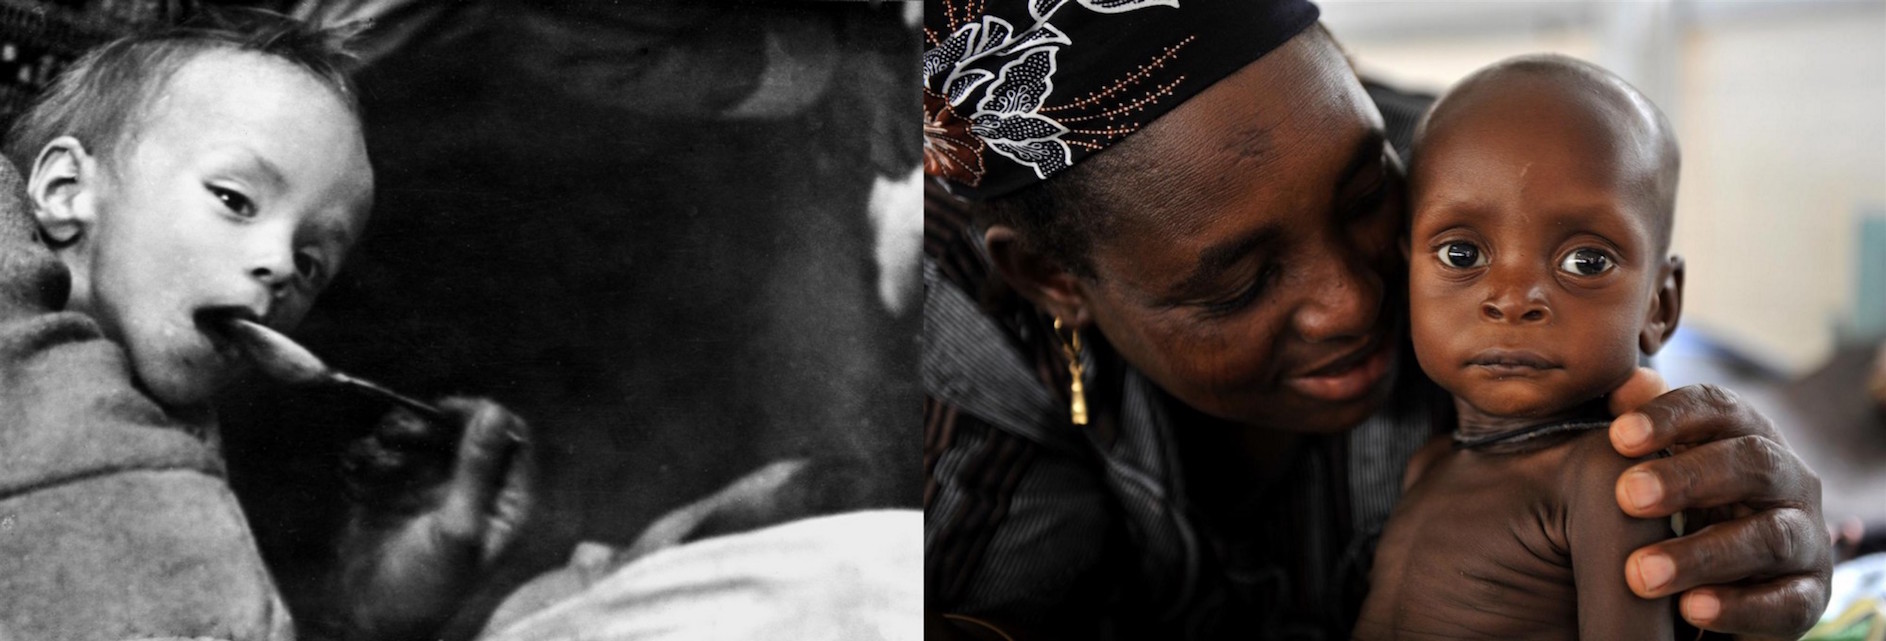 (Left) Circa 1946 in Greece, a severely malnourished boy is fed with a spoon. (Right) In 2009, a woman embraces her severely malnourished child at a nutritional rehabilitation centre in Niger.